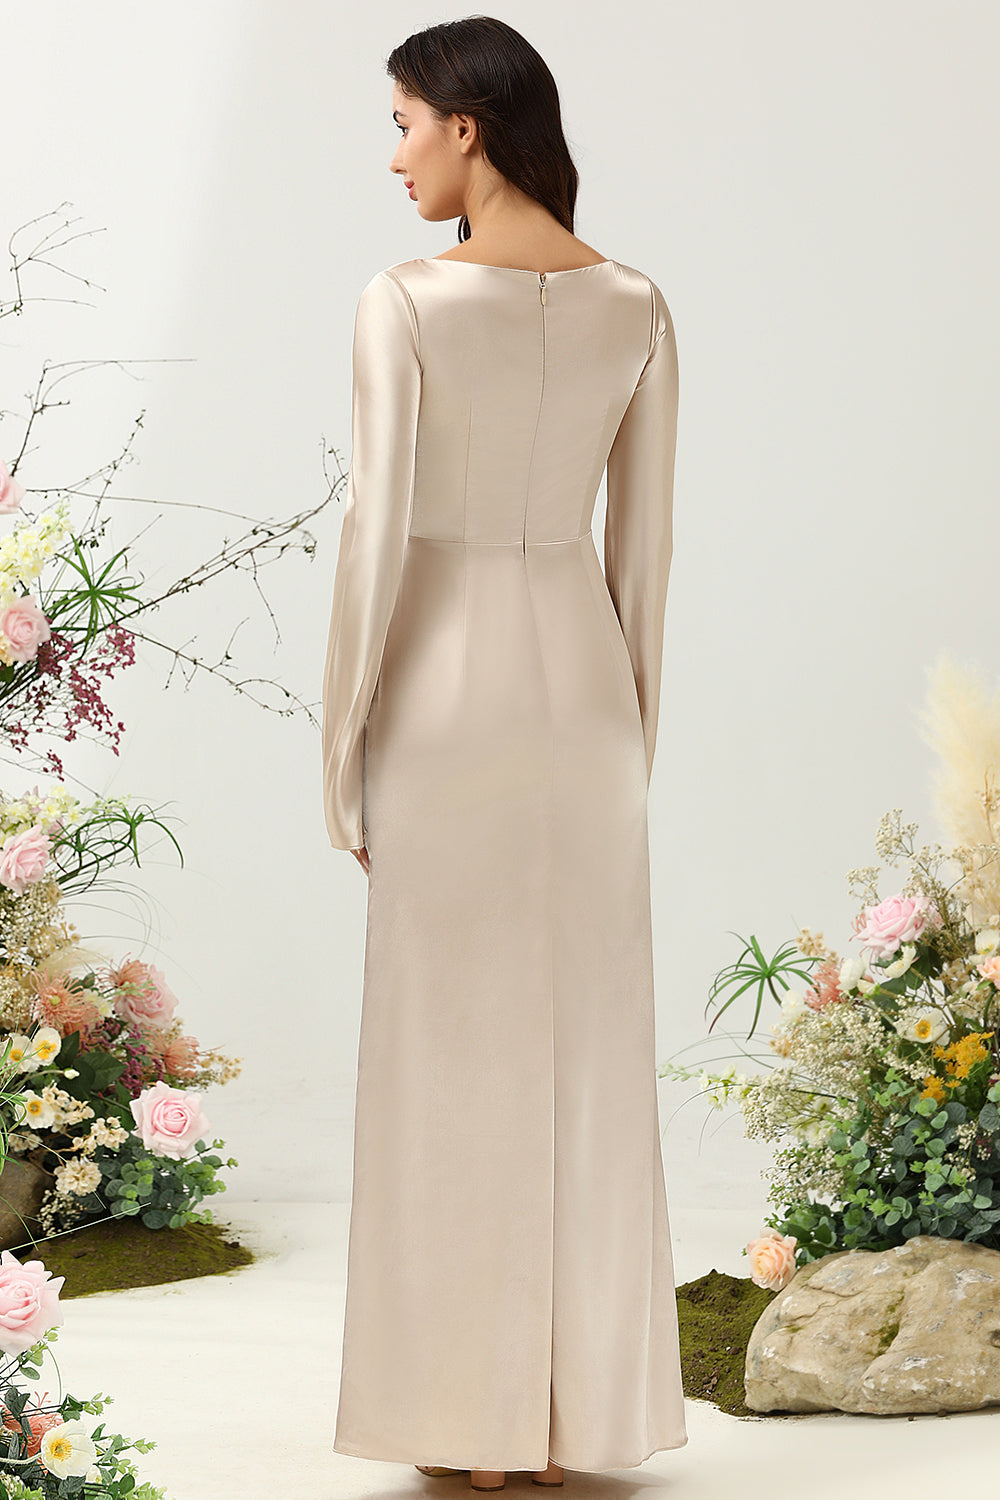 Champagne A Line V Neck Satin Bridesmaid Dress with Long Sleeves